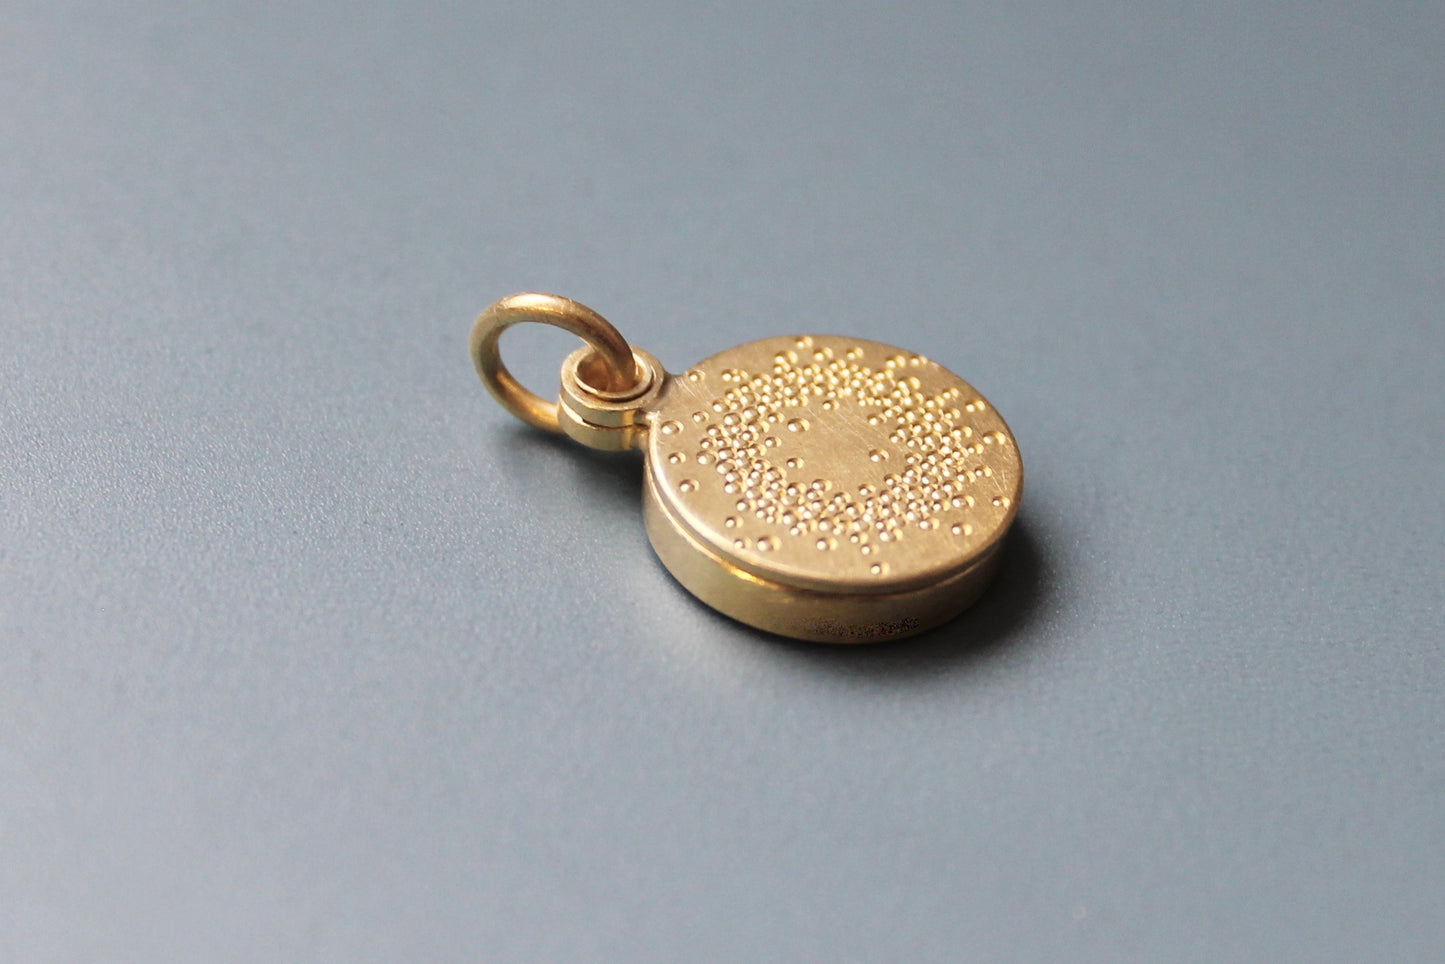 small golden locket for one picture with 1000 dots design